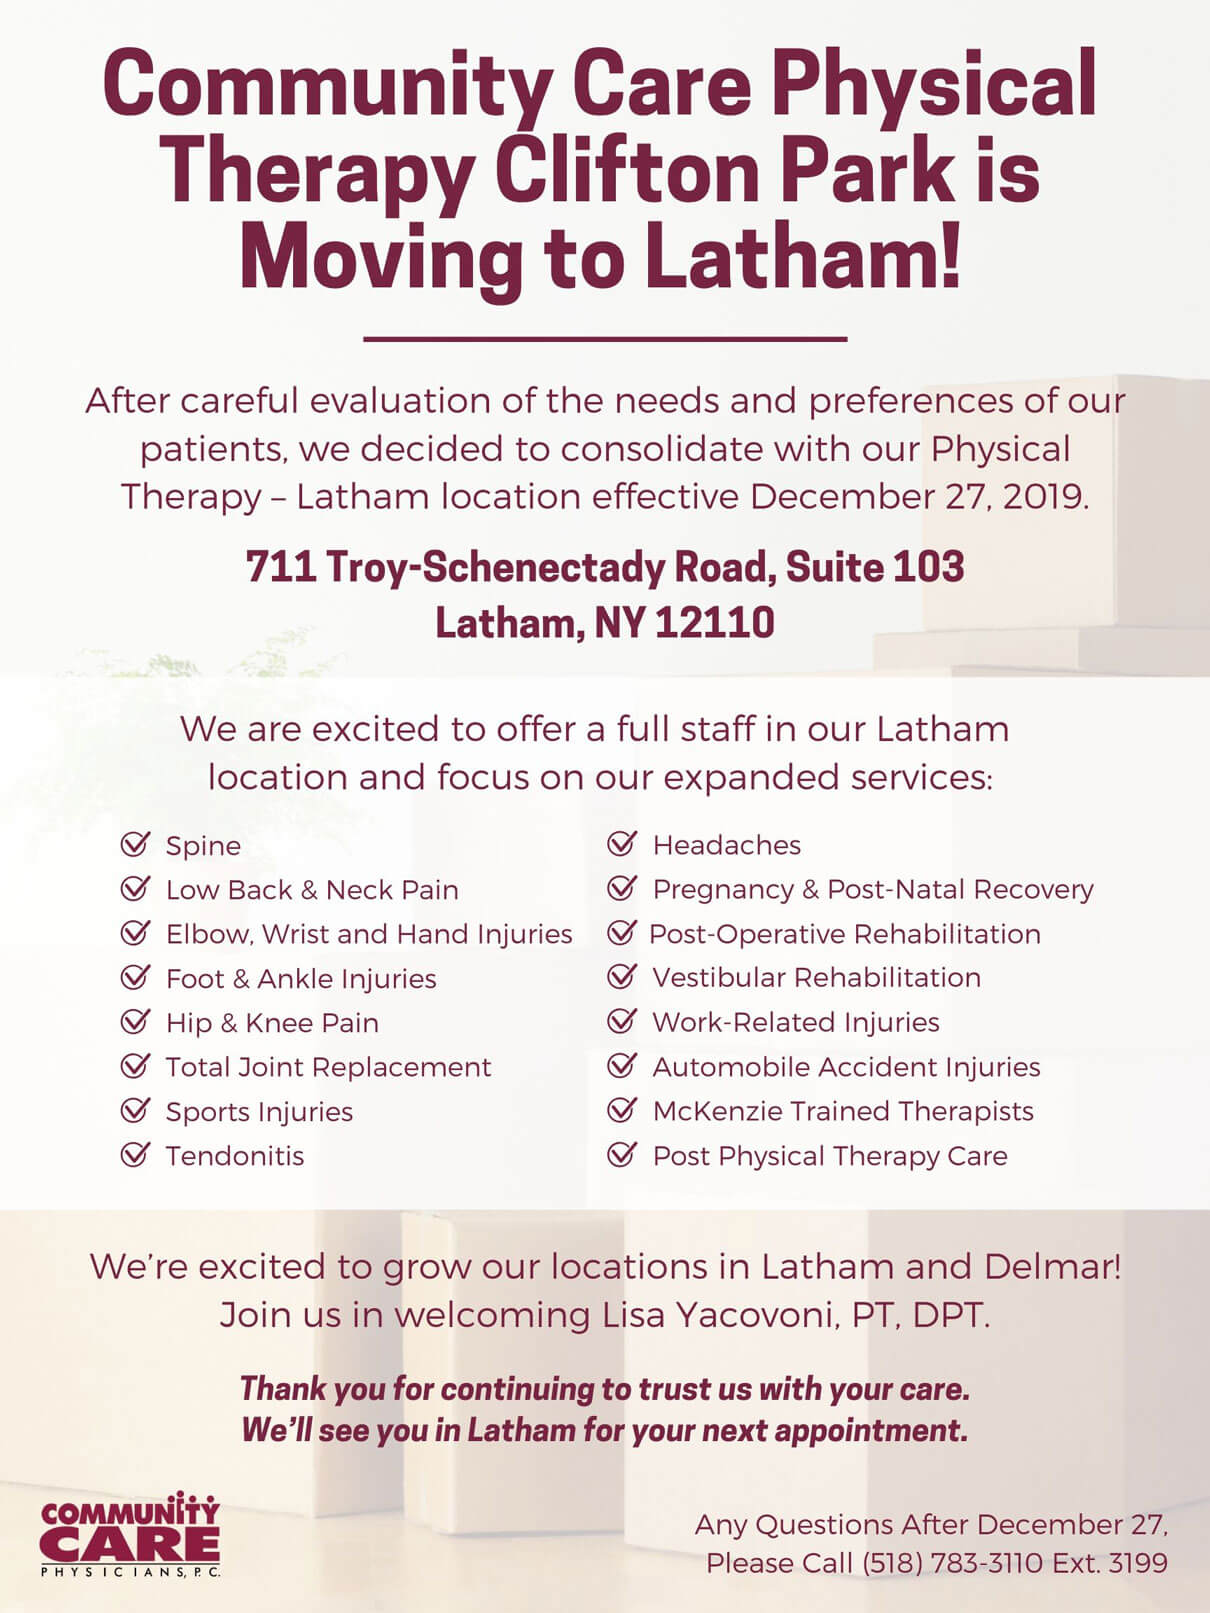 Community Care Physical Therapy Clifton Park is Moving to Latham